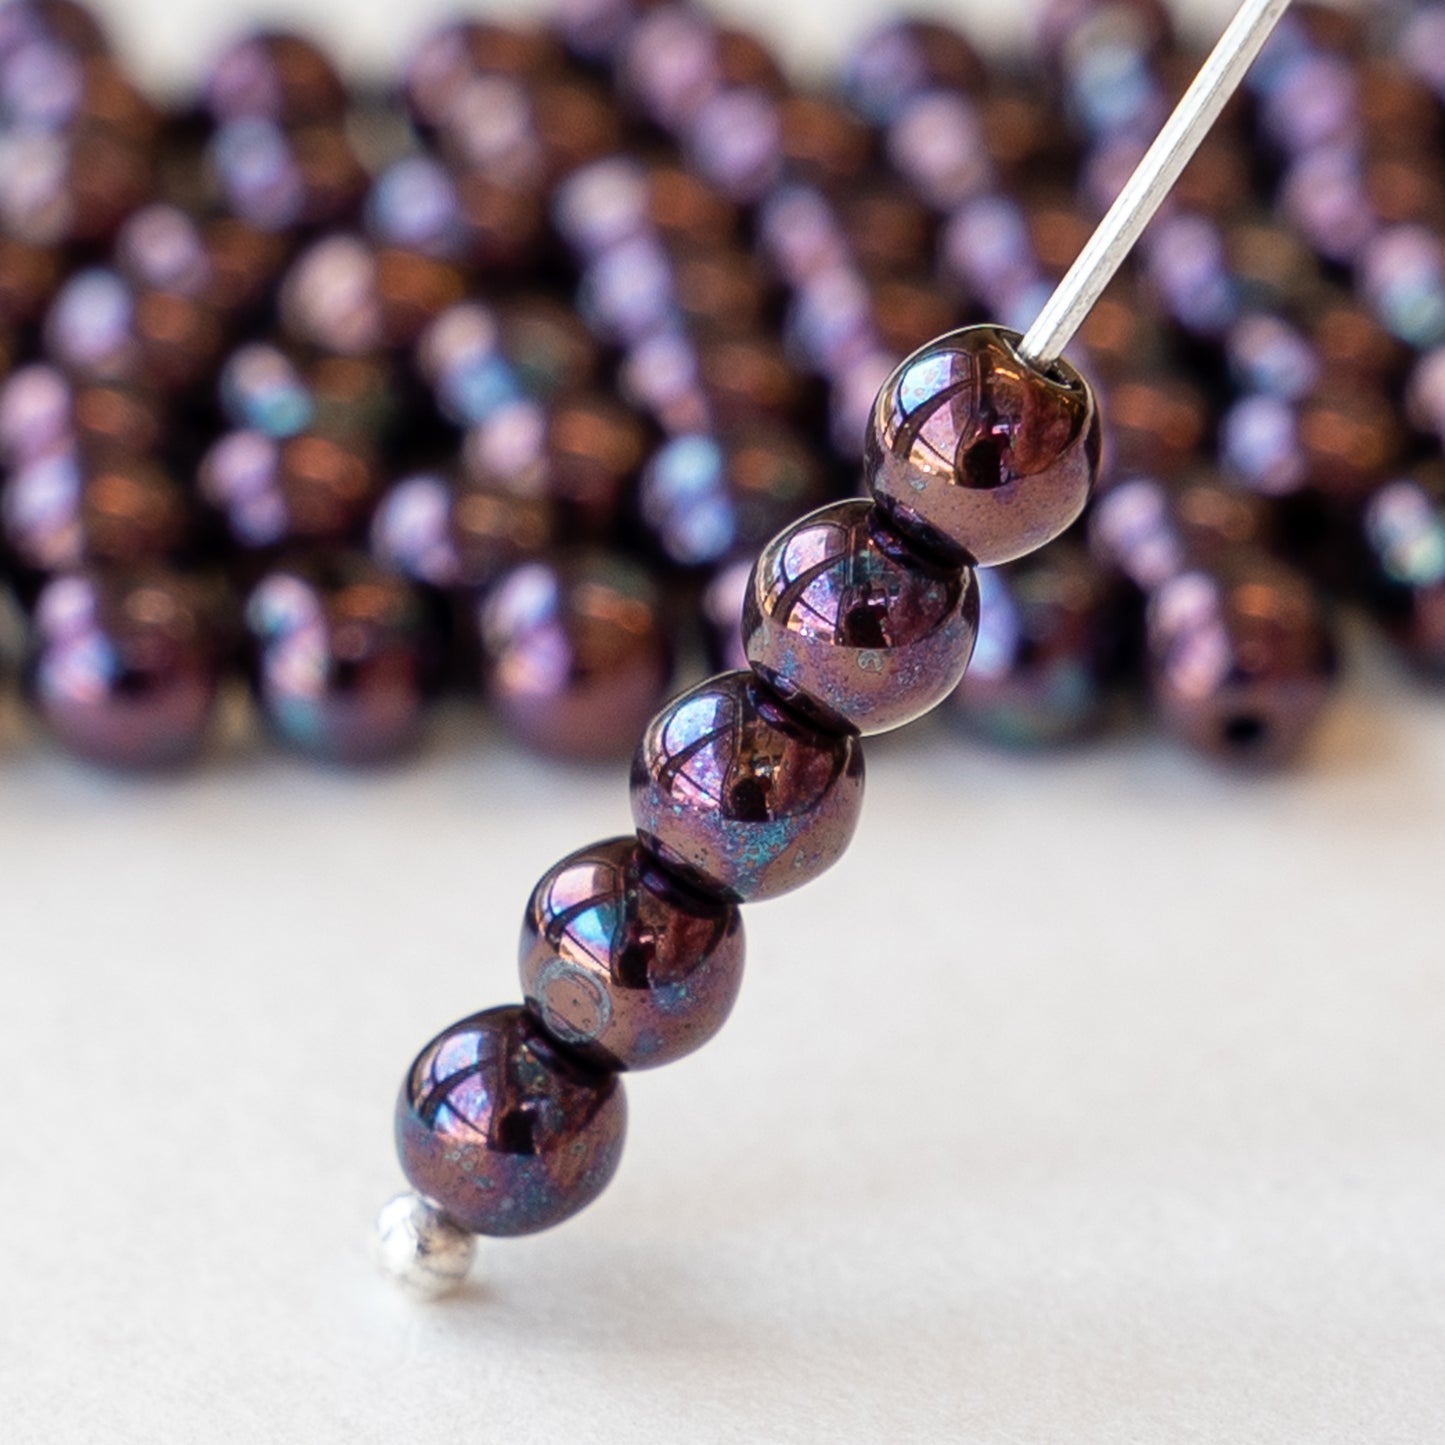 Load image into Gallery viewer, 4mm Round Glass Beads - Deep Eggplant Purple - 100 Beads
